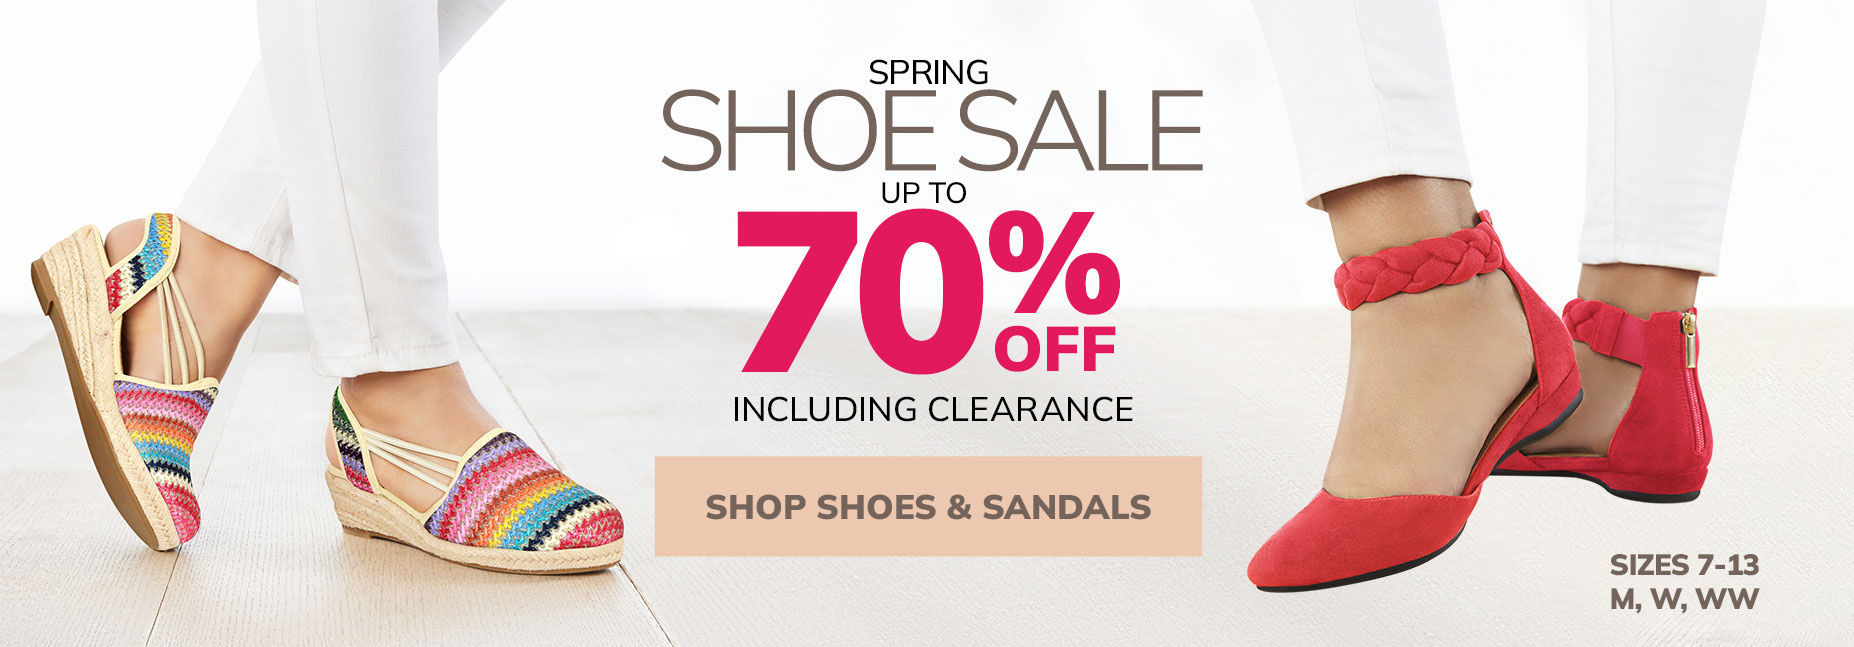 Up to 70% Off - Spring Shoe Sale